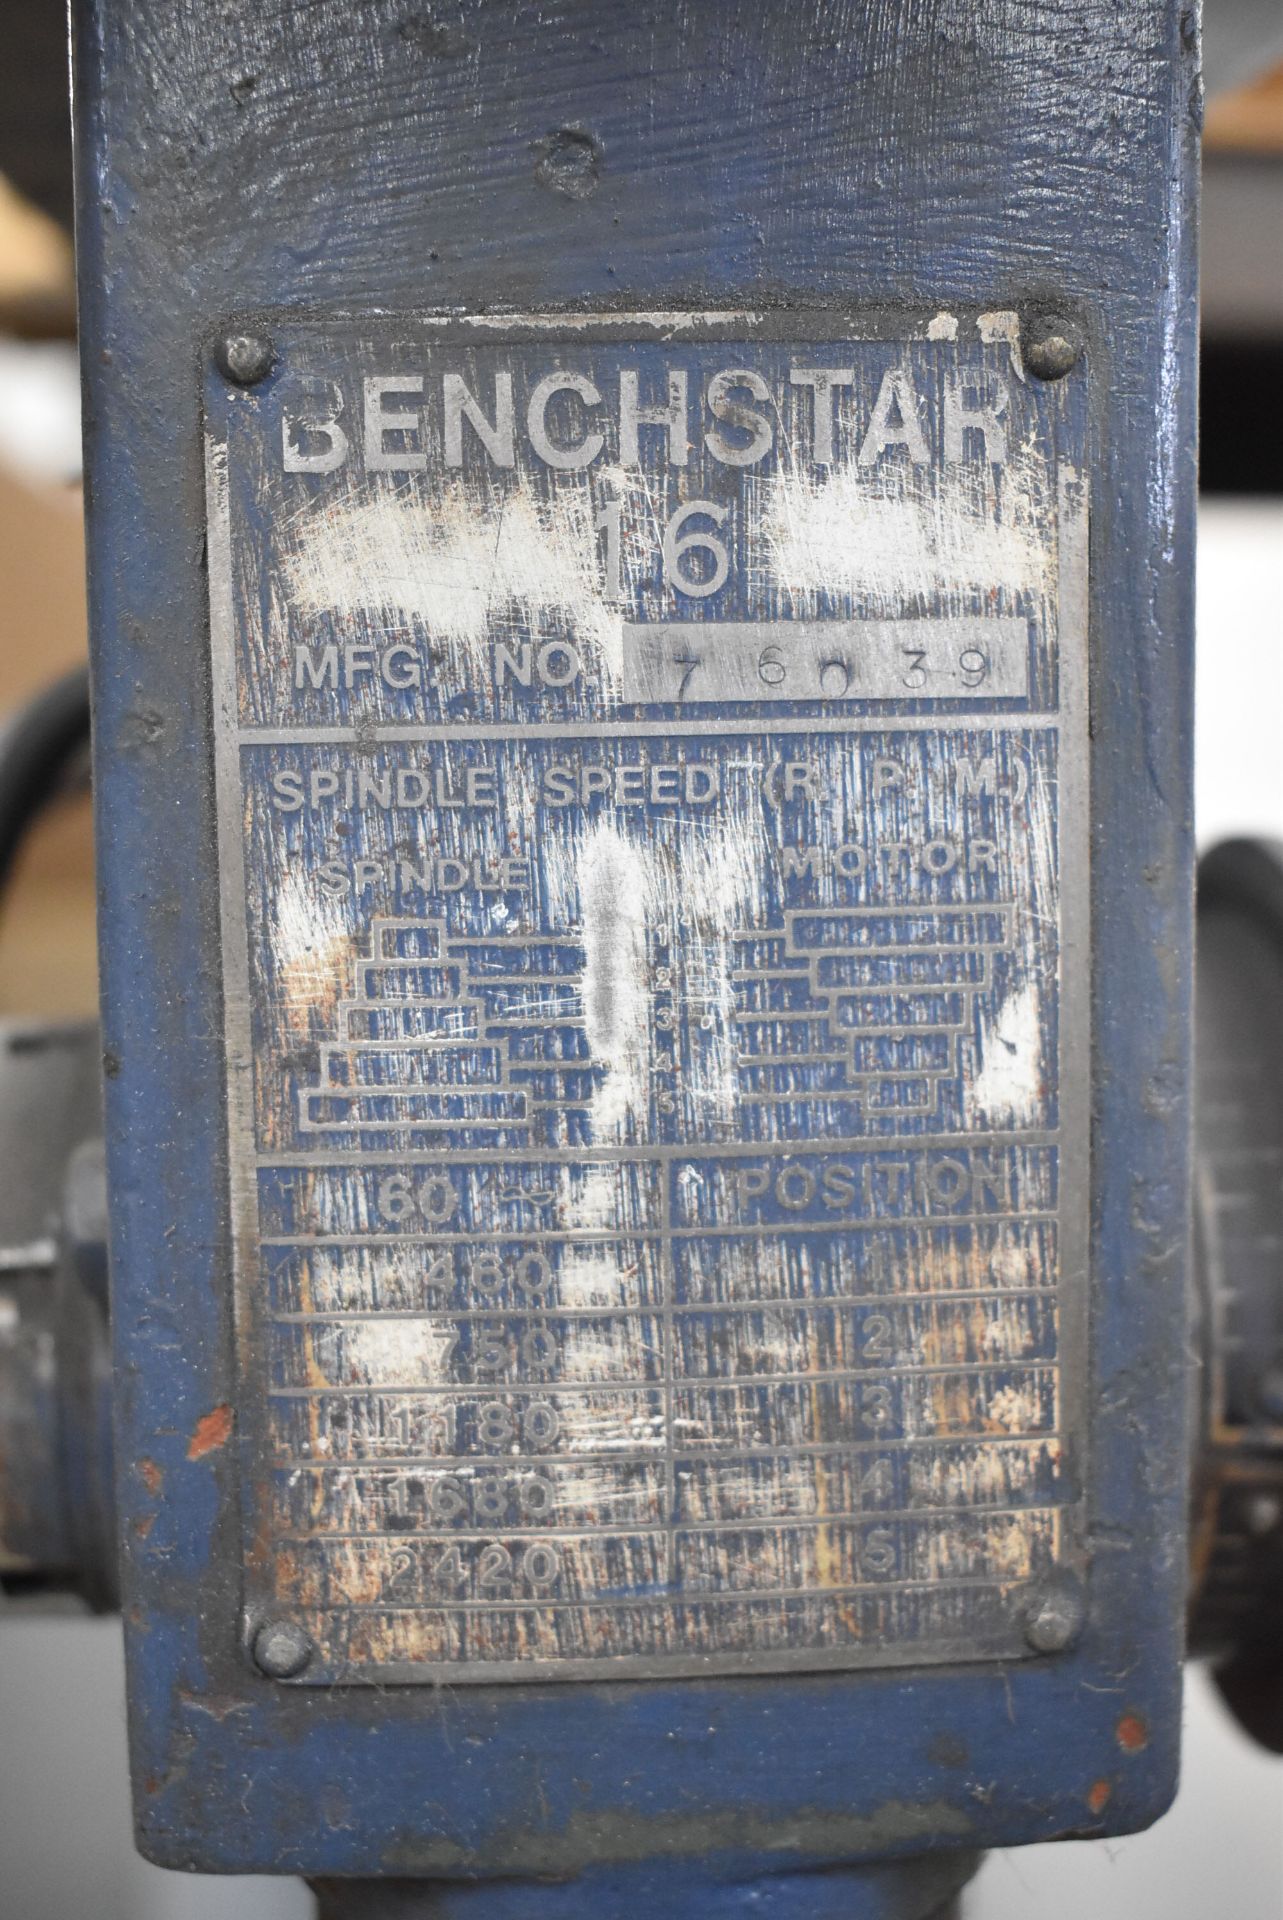 BENCHSTAR 16" BENCH-TYPE DRILL PRESS WITH STAND, 12" DIA. TABLE, SPEEDS TO 2400 RPM, S/N: 76039 - Image 4 of 5